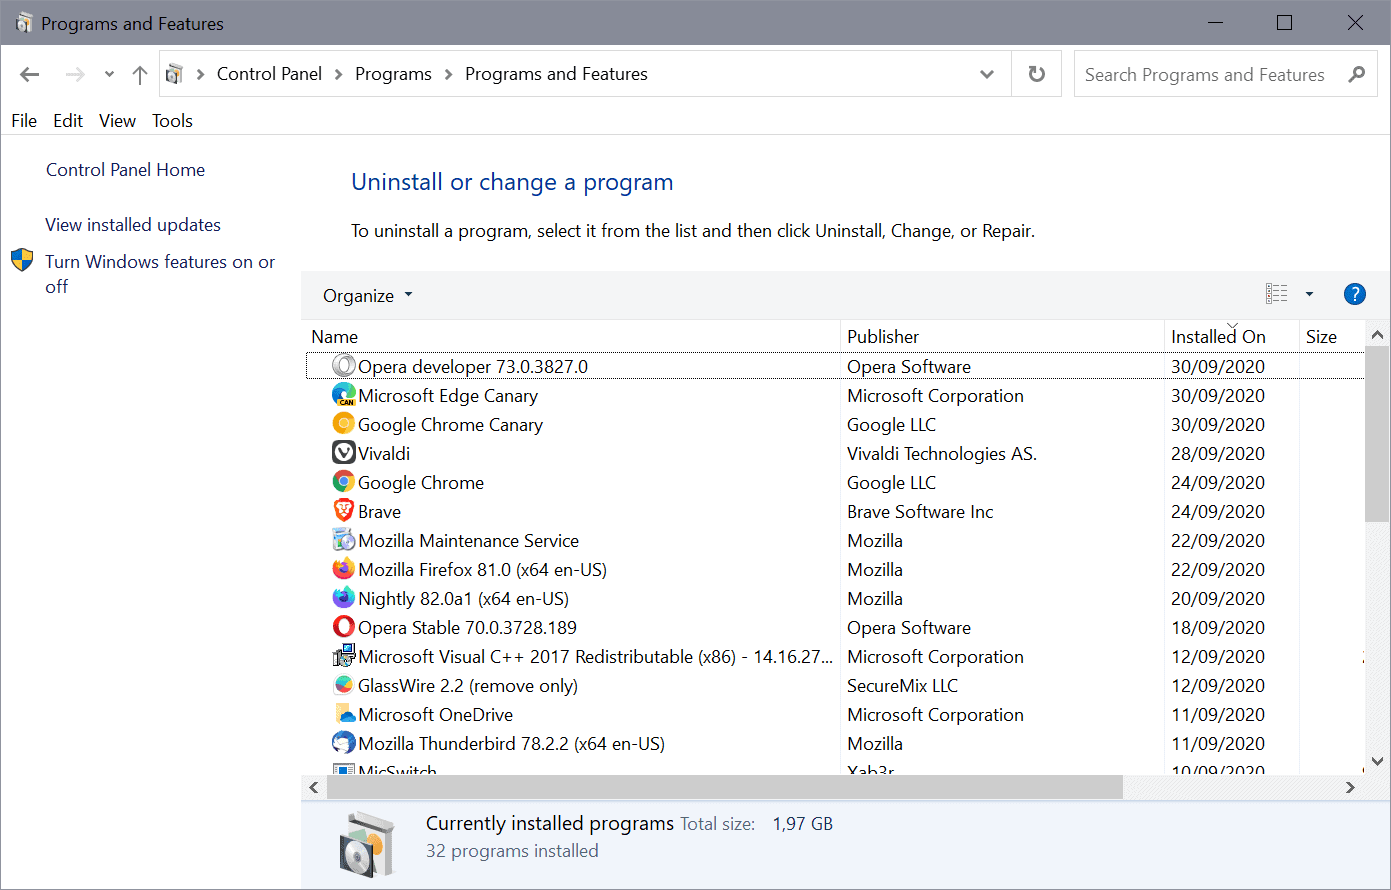 Press Win + X and select Apps and Features.
Scroll through the list of installed programs and identify any recently installed software that may be causing conflicts with the keyboard.